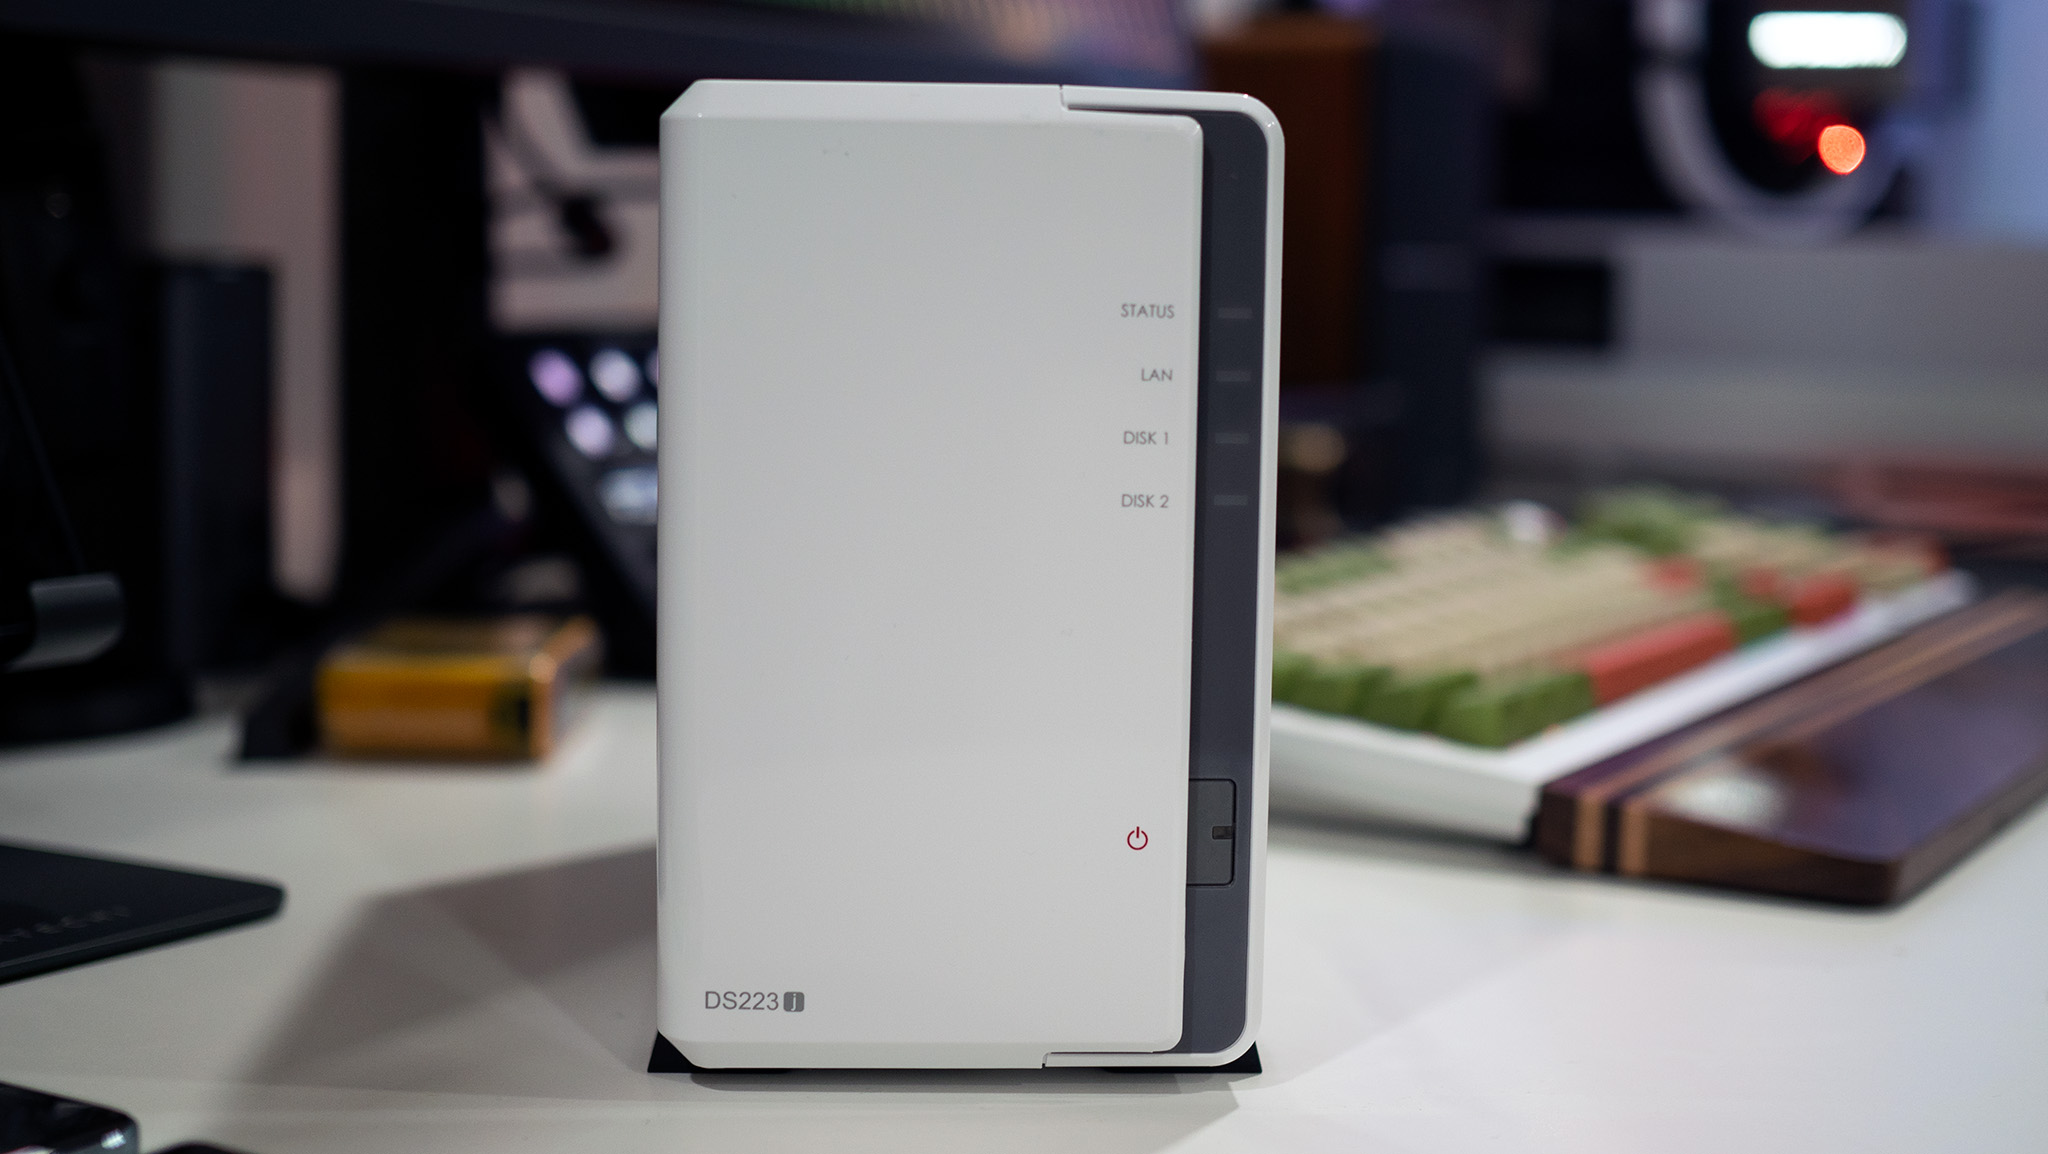 Synology's new DS223j 2-bay NAS sees first discount to $155 (Reg